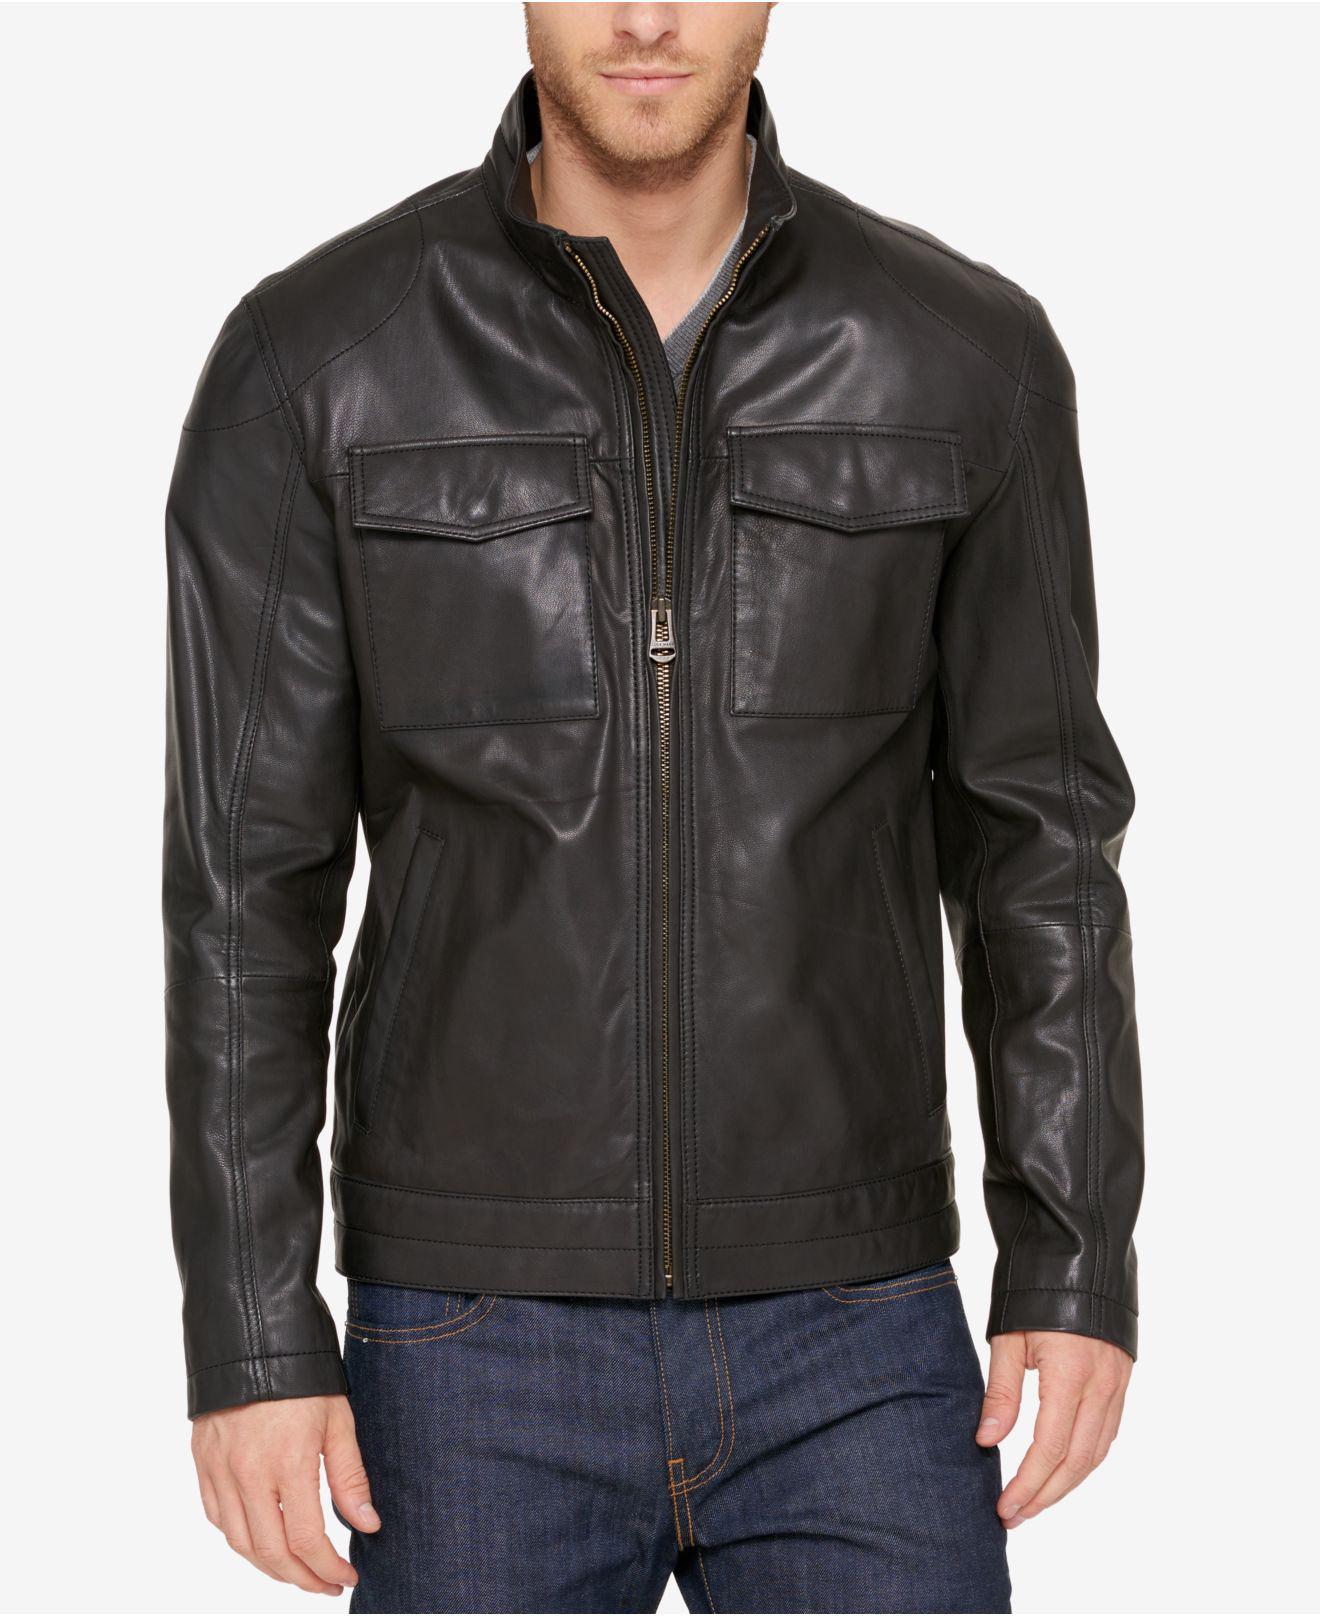 Cole Haan Leather Trucker Jacket in Black for Men - Save 54% - Lyst